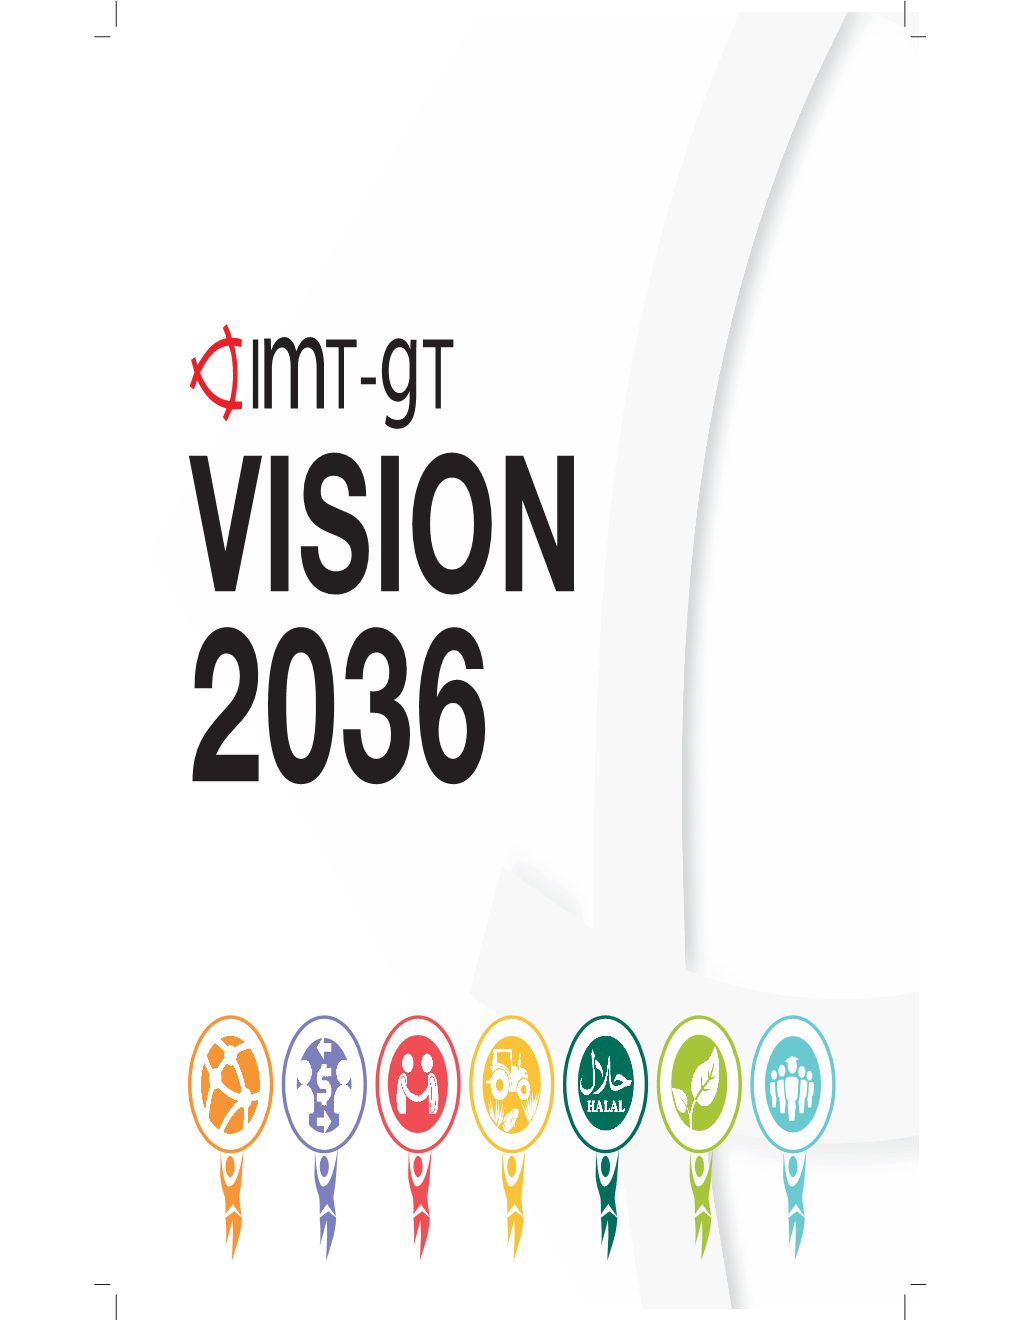 Indonesia-Malaysia-Thailand Growth Triangle (IMT-GT) Vision 2036